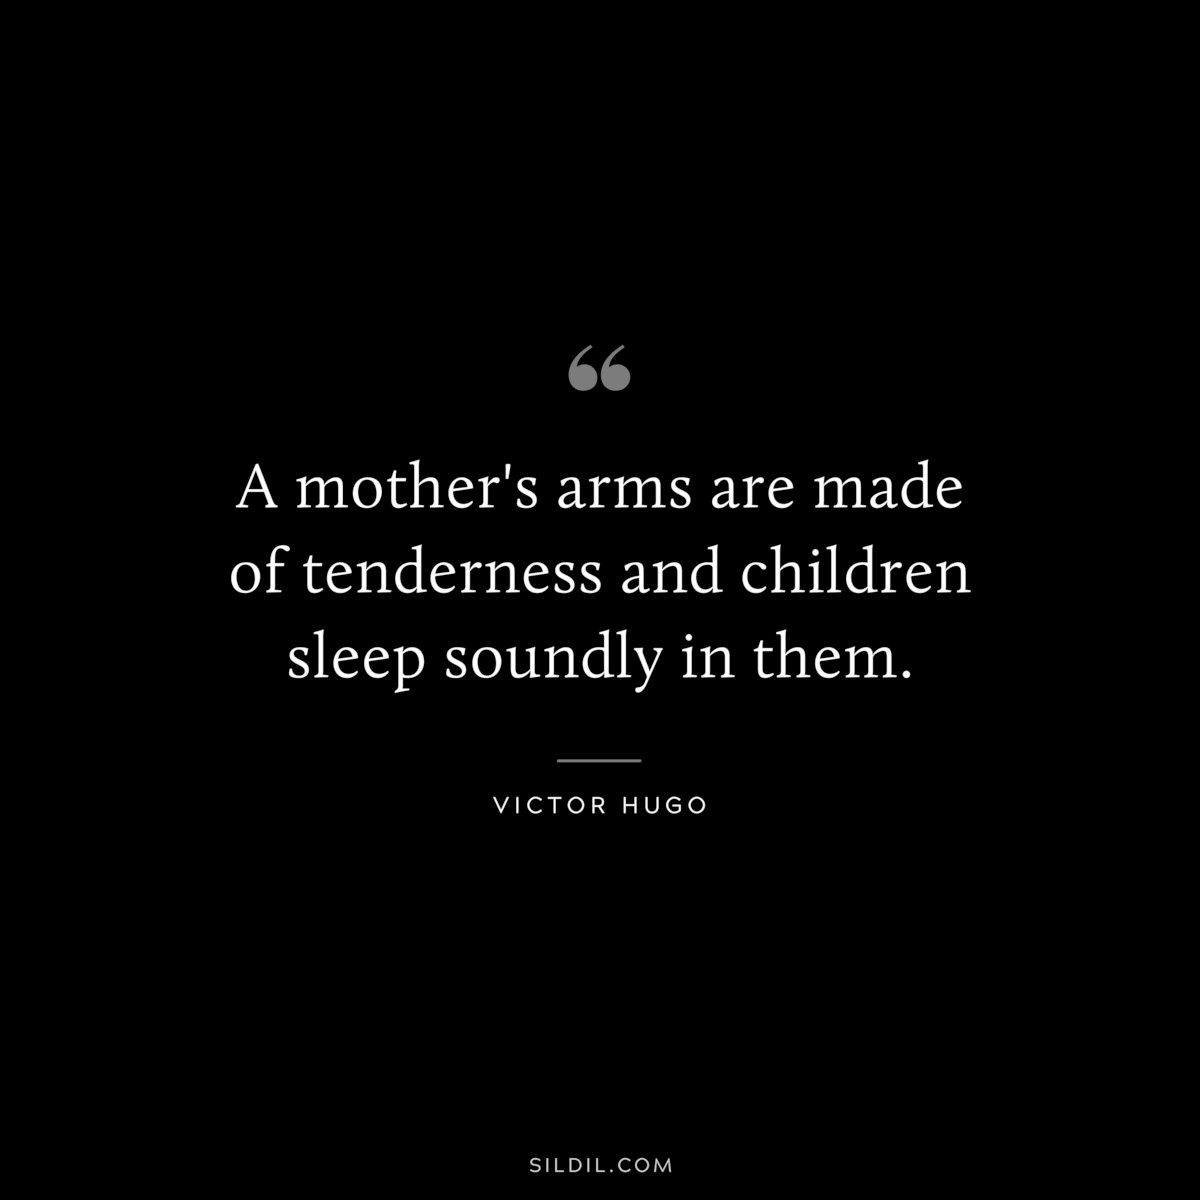 A mother's arms are made of tenderness and children sleep soundly in them.― Victor Hugo